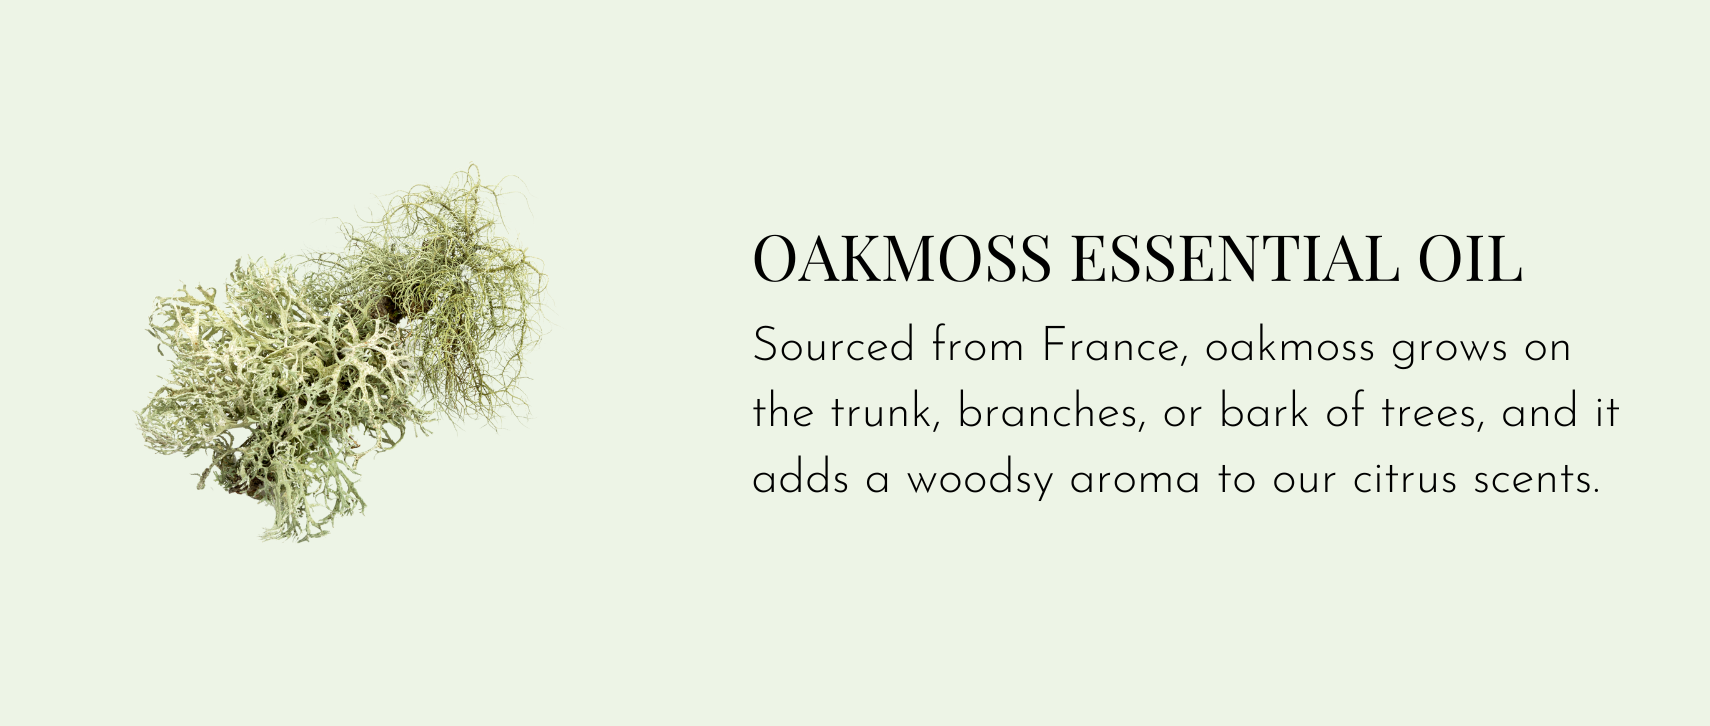 Oakmoss Essential Oil – Sourced from France, oakmoss grows on the trunk, branches, or bark of trees, and it adds a woodsy aroma to our citrus scents.